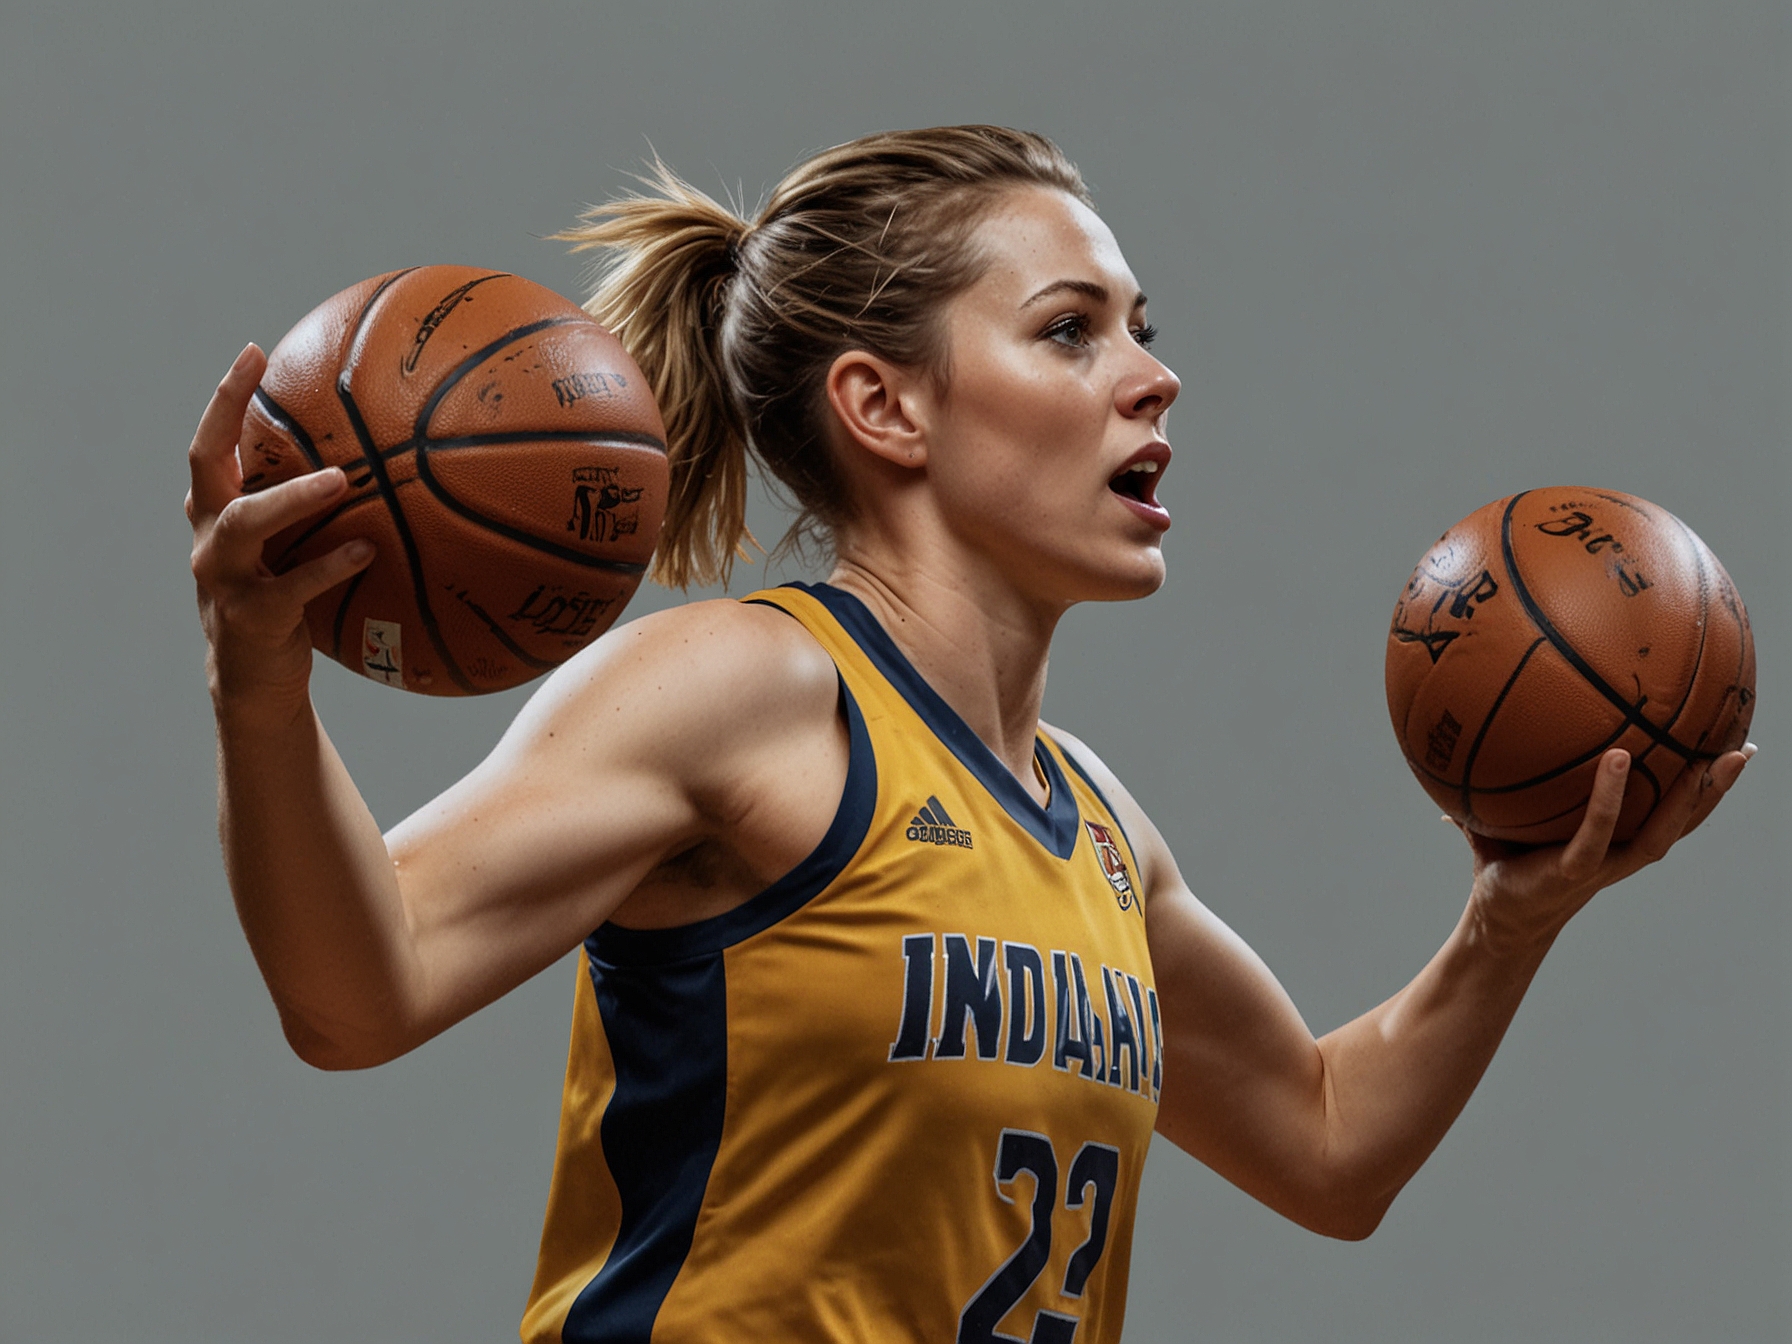 Caitlin Clark of the Indiana Fever is highlighted in action, taking a precise three-point shot from beyond the arc, demonstrating her superior shooting range that outperforms NBA stars.